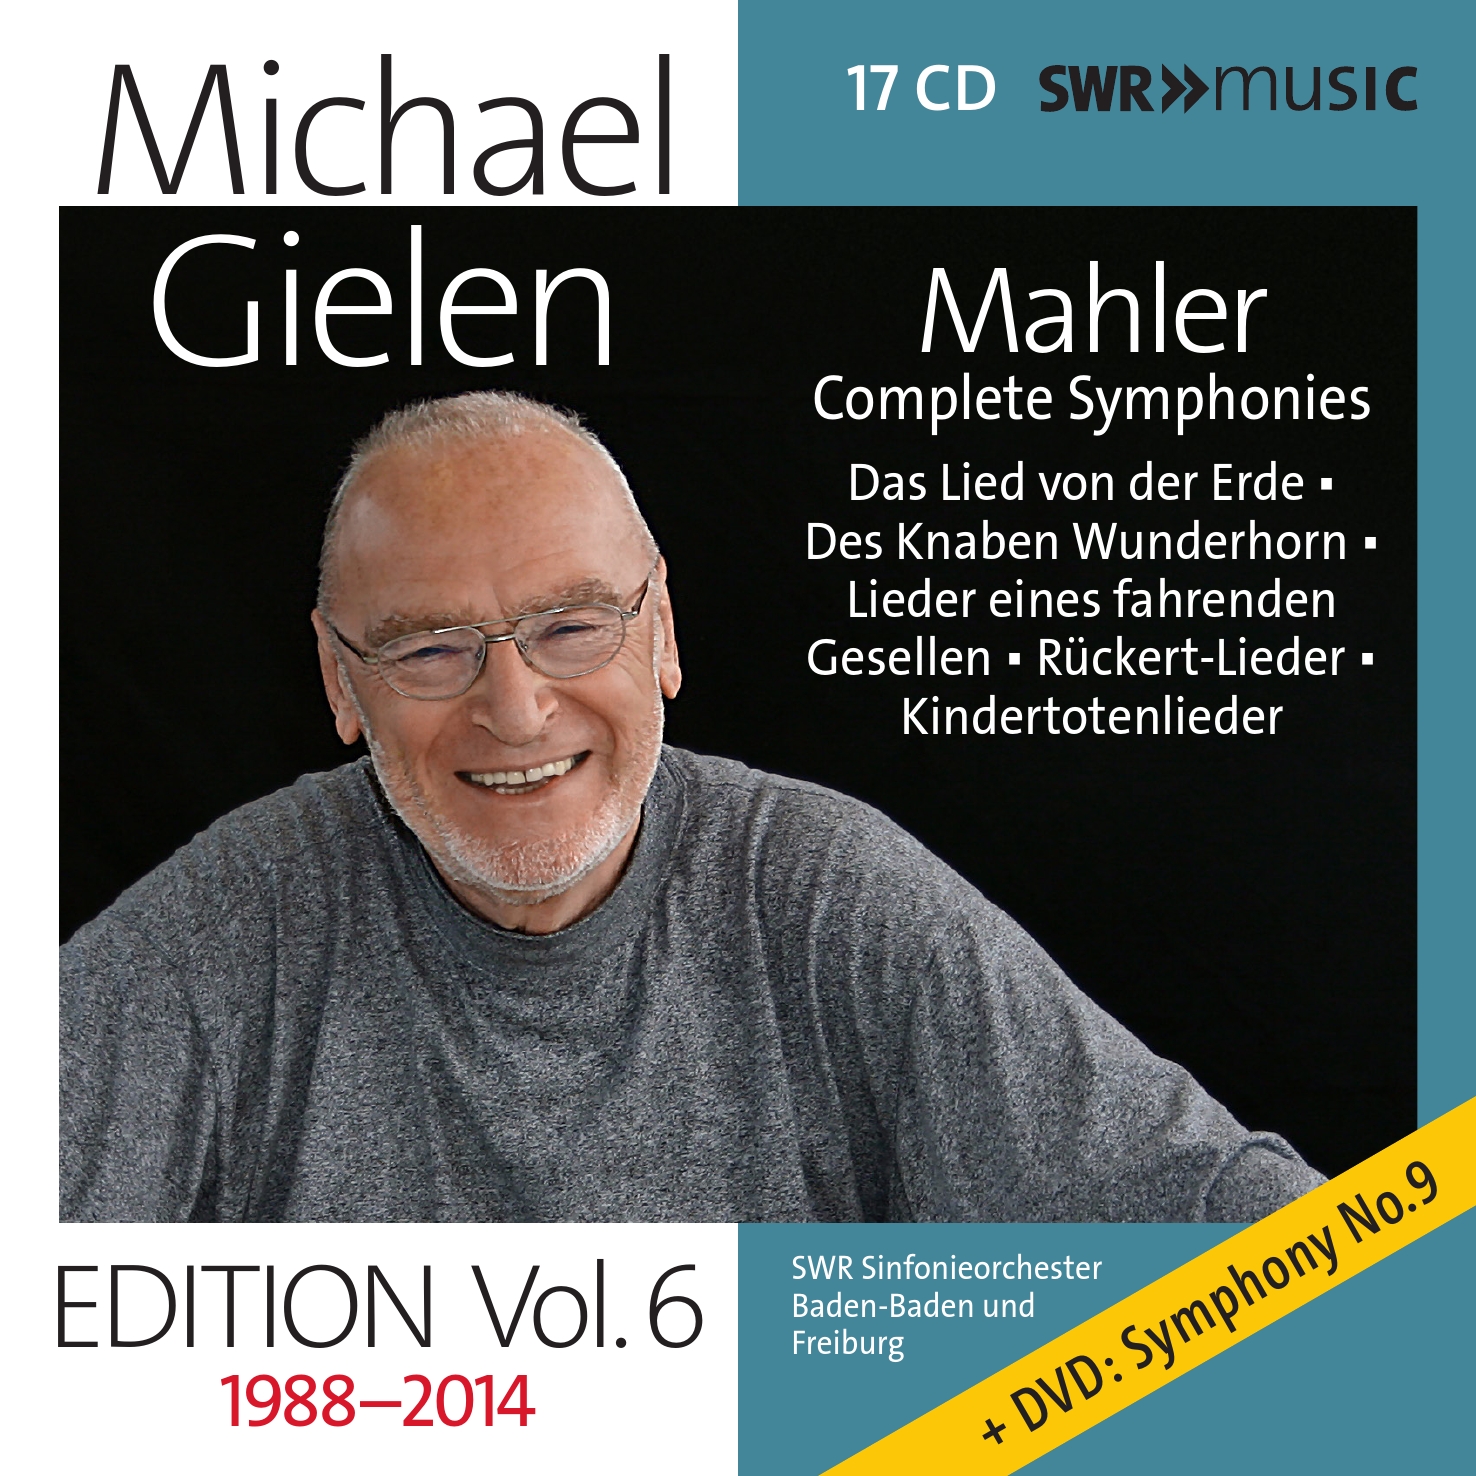 Michael Gielen Ed - Vol 6 Mahler Symphonies and. Song Cycles Recorded 1988-2014 cd17